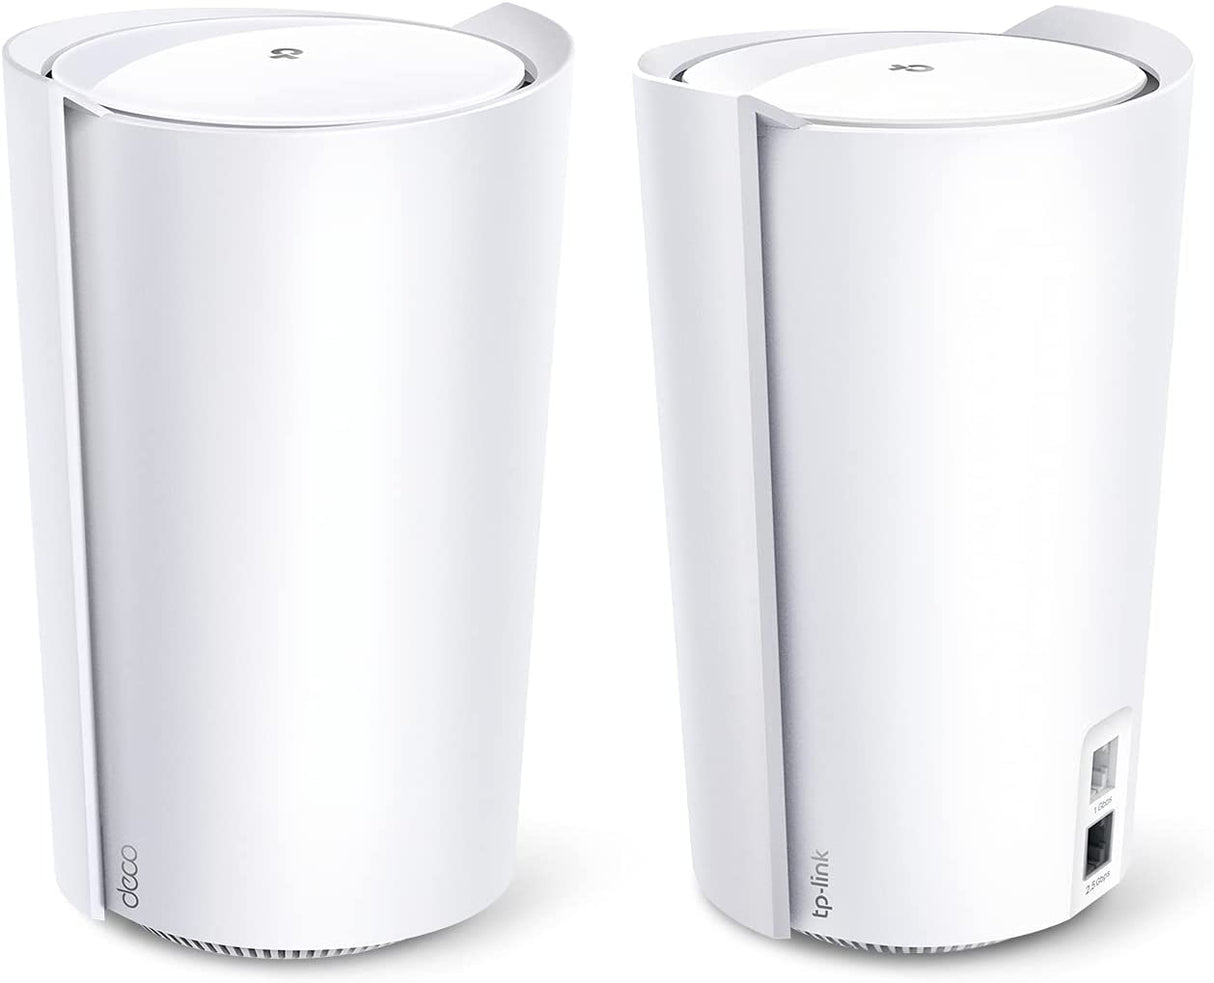 TP-Link AX6600 Deco Tri-Band WiFi 6 Mesh System(Deco X90) - Covers up to 6000 Sq.Ft, Replaces Routers and Extenders, AI-Driven and Smart Antennas, 2-Pack AX6600 Tri-Band WiFi 6(New Model)